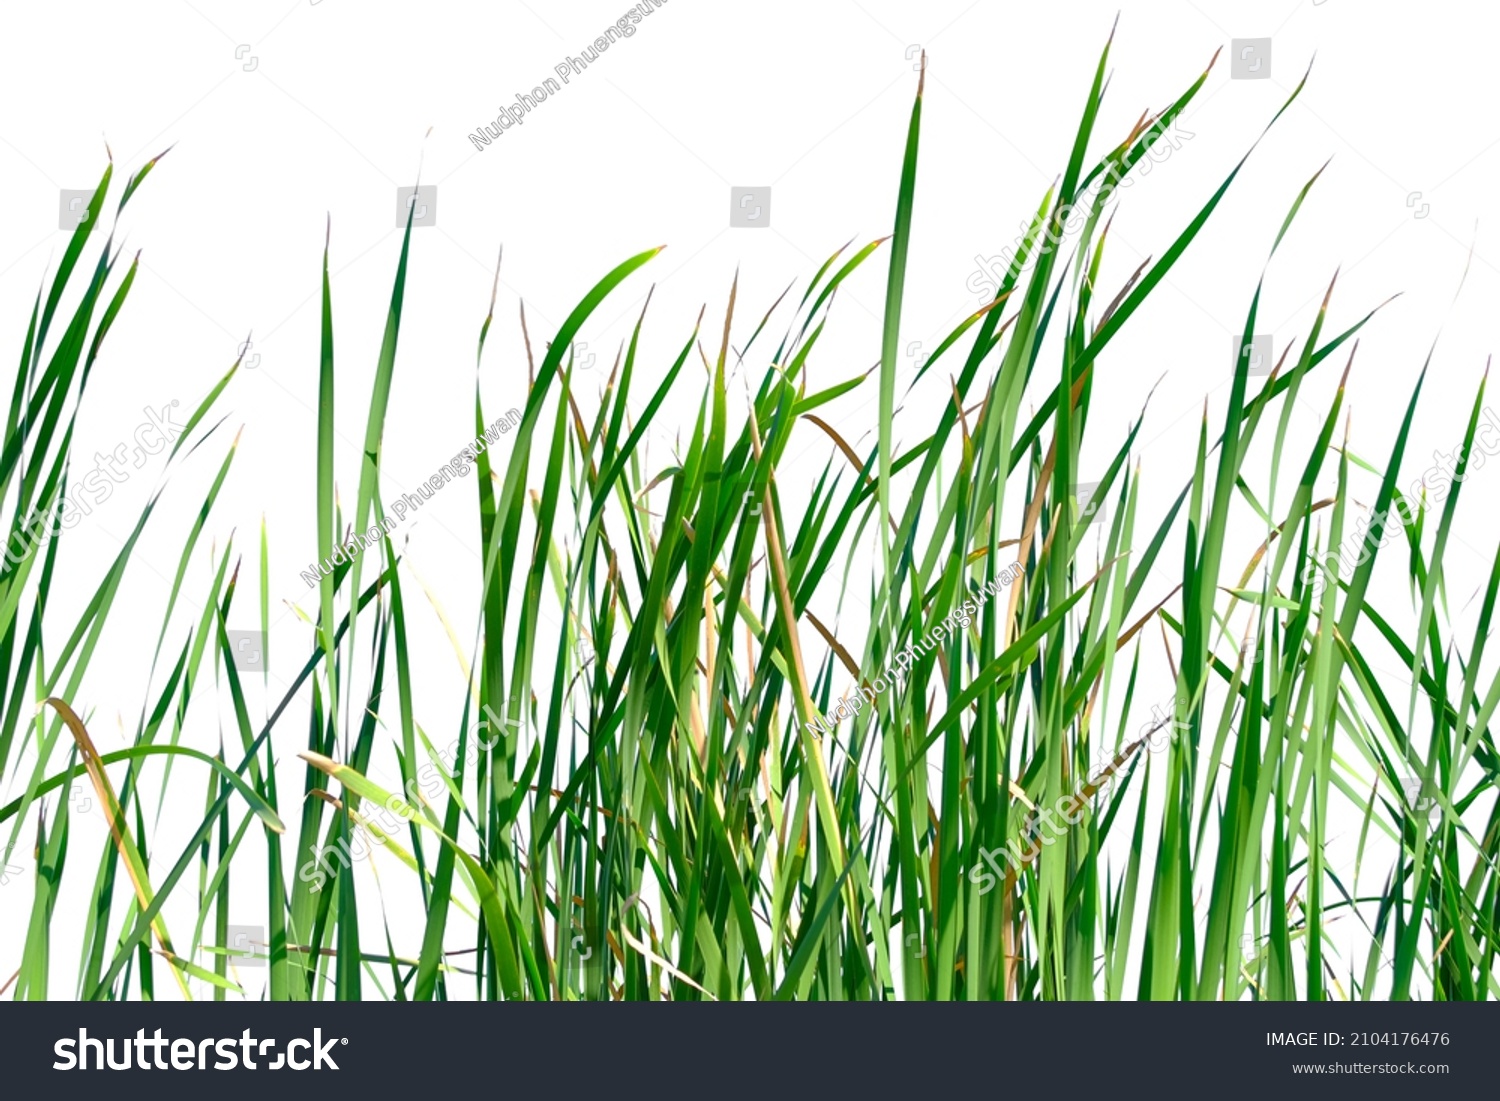 Long green grass and reeds isolated on white background with copy space #2104176476